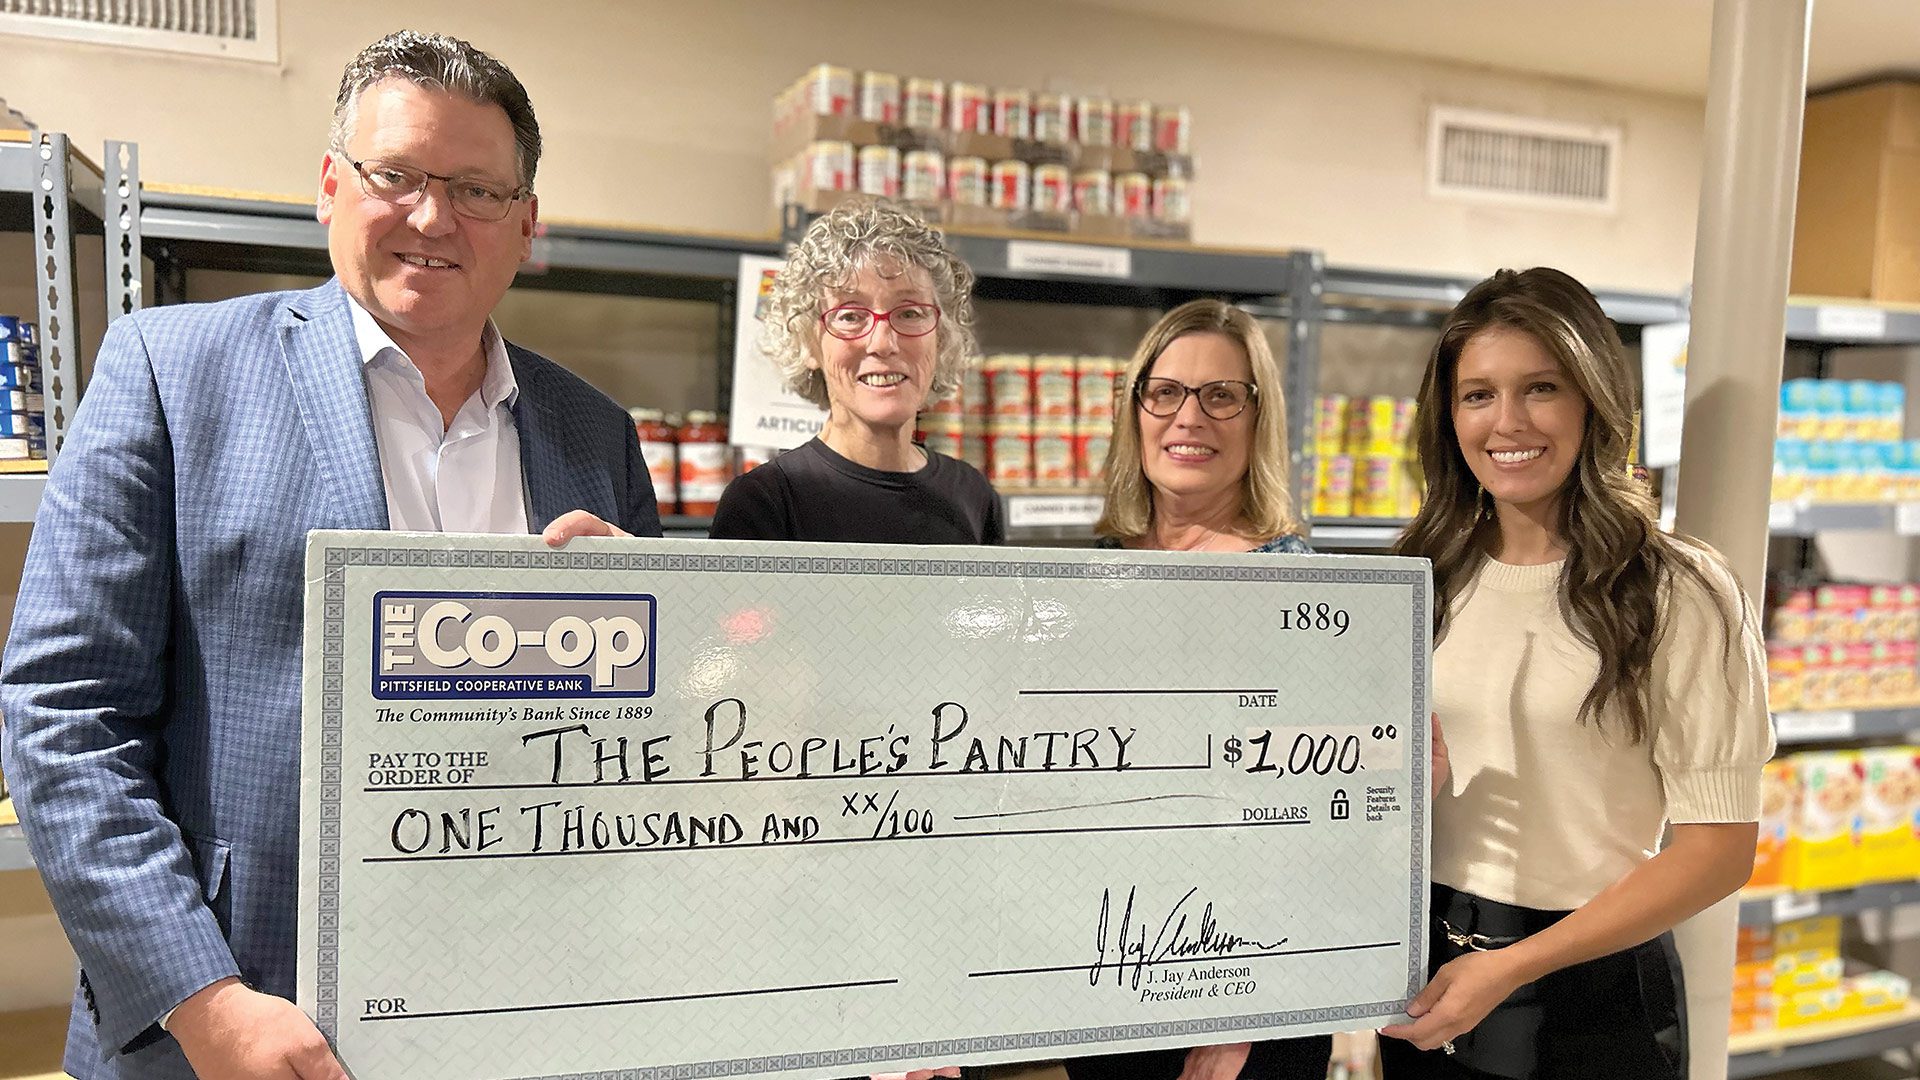 J. Jay Anderson (left), president and CEO of Pittsfield Cooperative Bank, recently presented a $1,000 donation from the bank to the People’s Pantry in Great Barrington